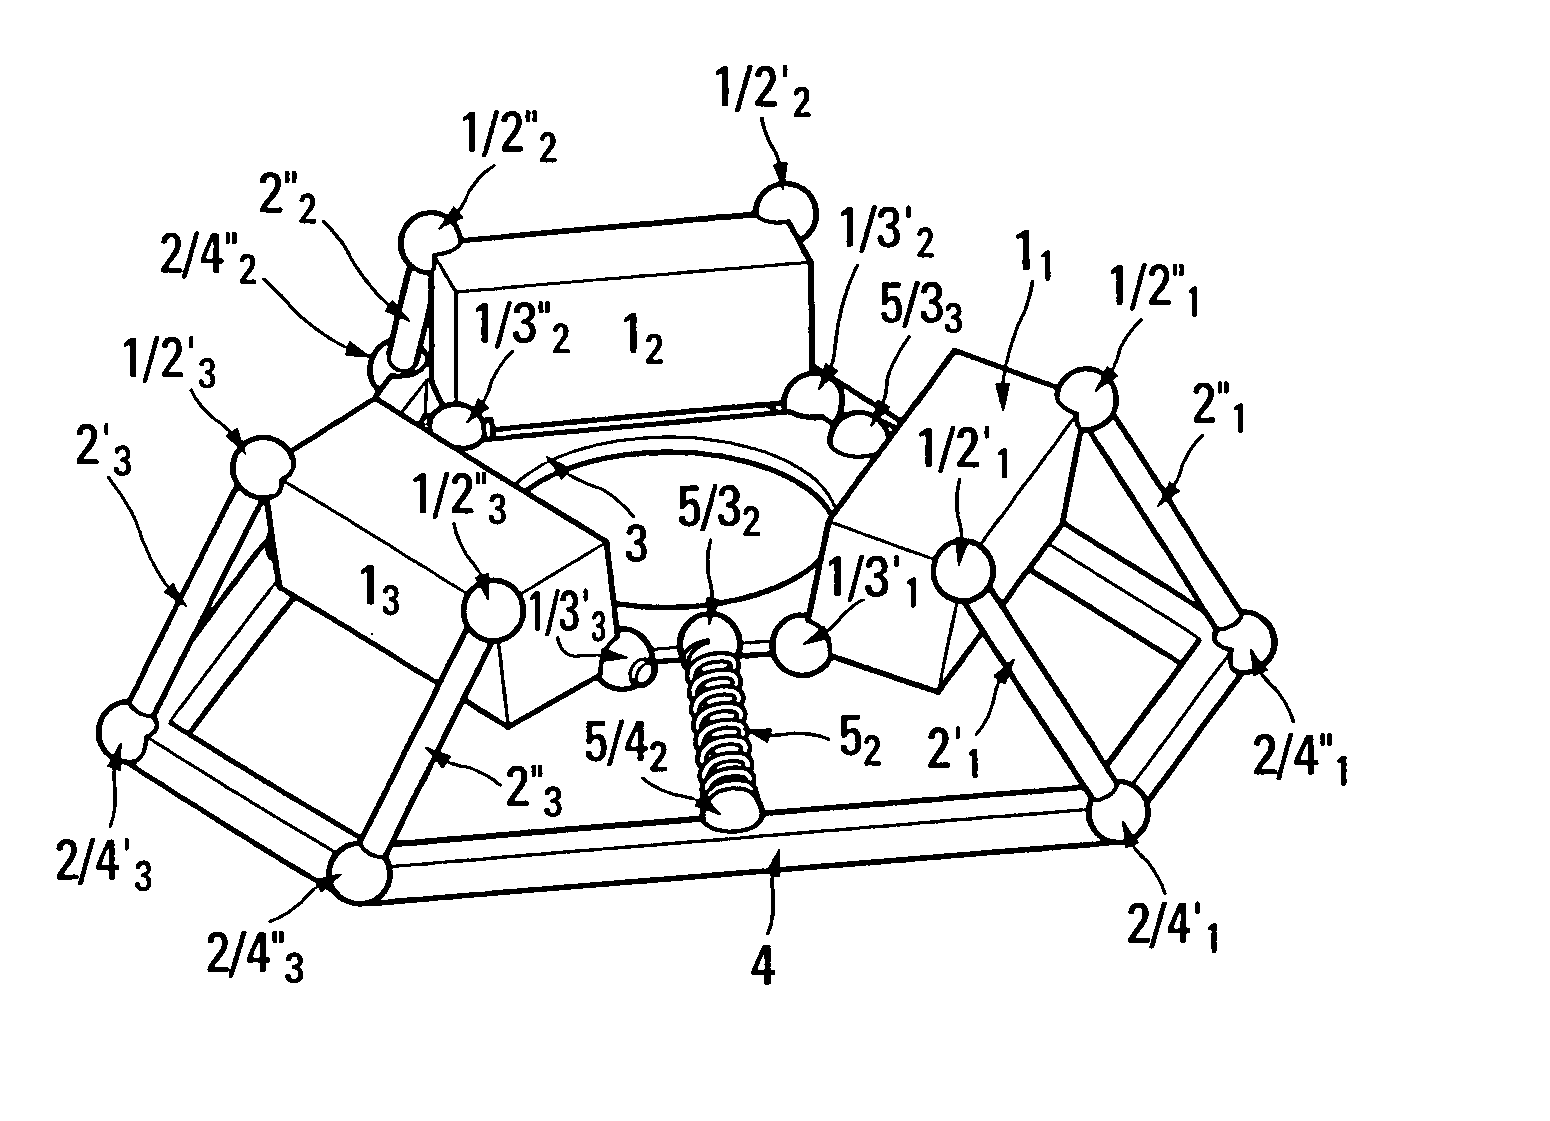 Elementary and complex coupling devices, and their use